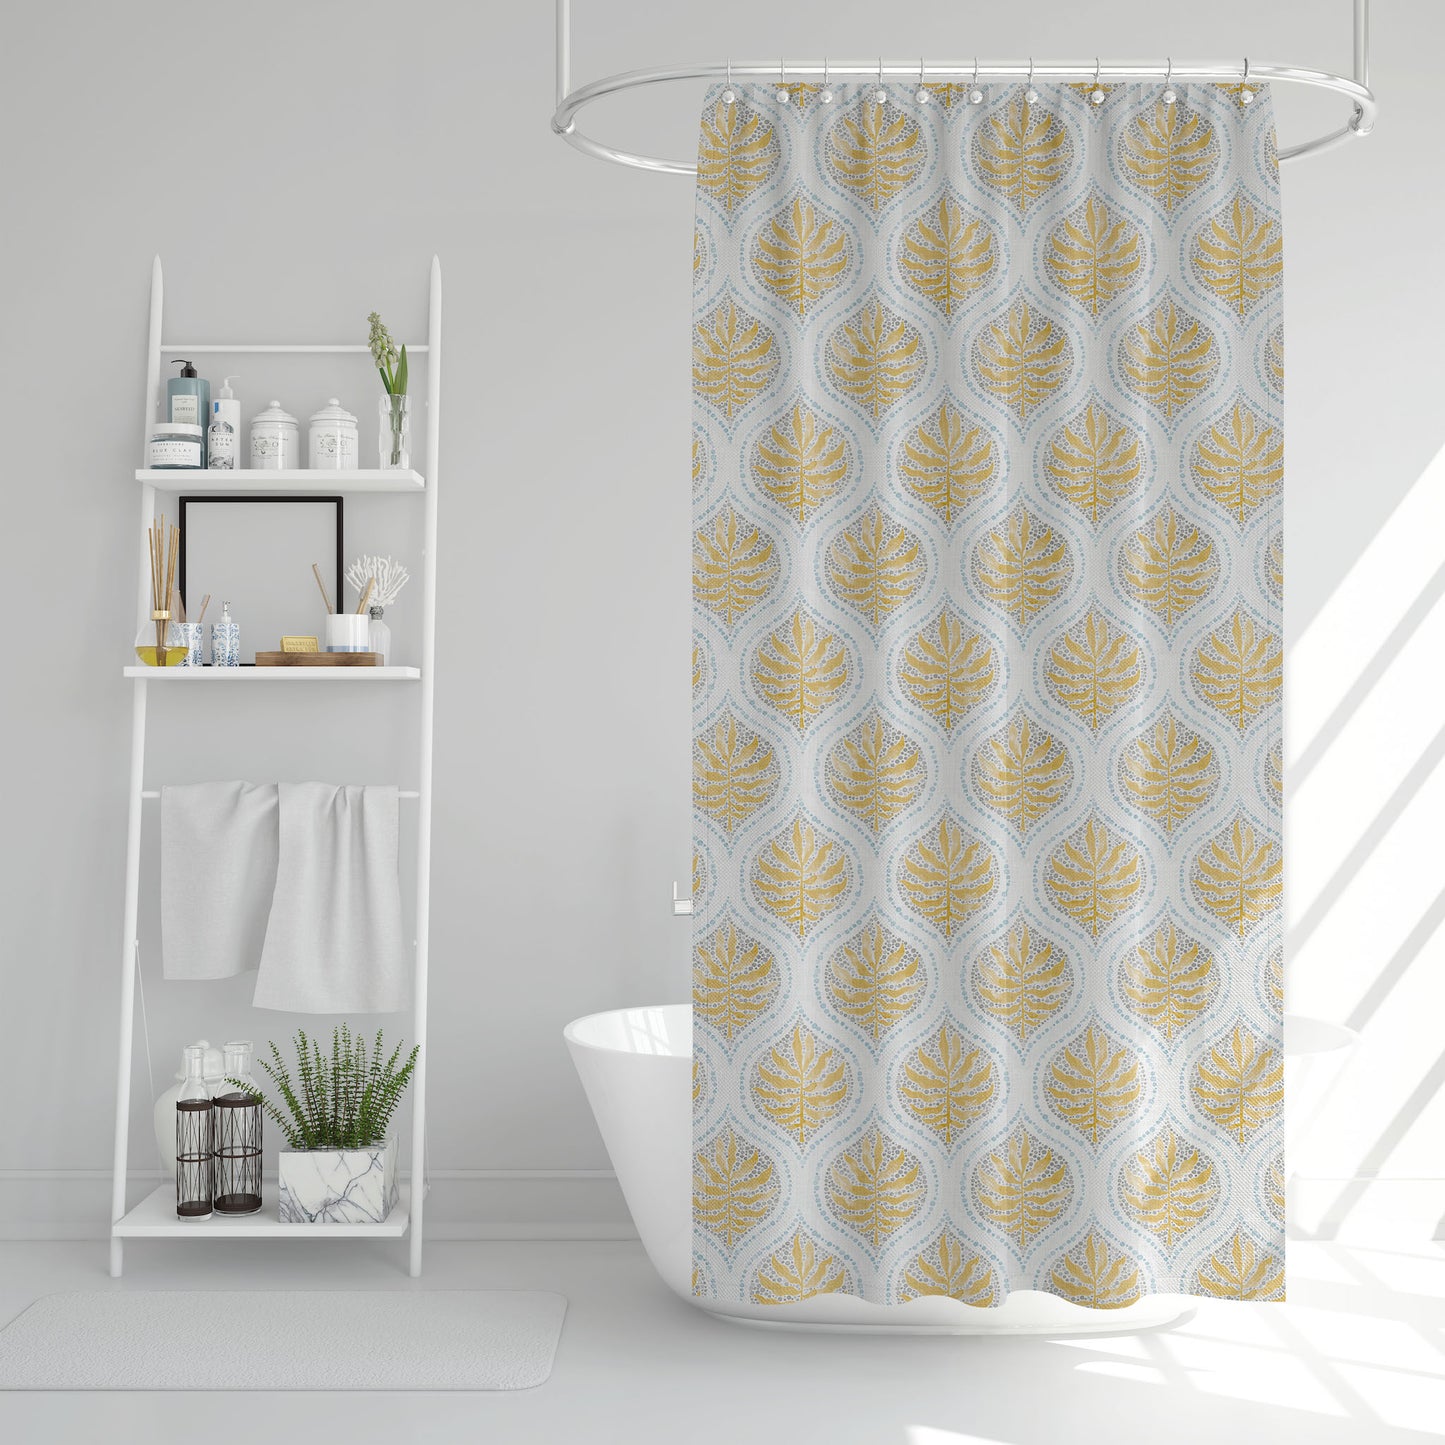 Shower Curtain in Airlie Amber Ogee Floral Watercolor- Gold, Gray, Blue